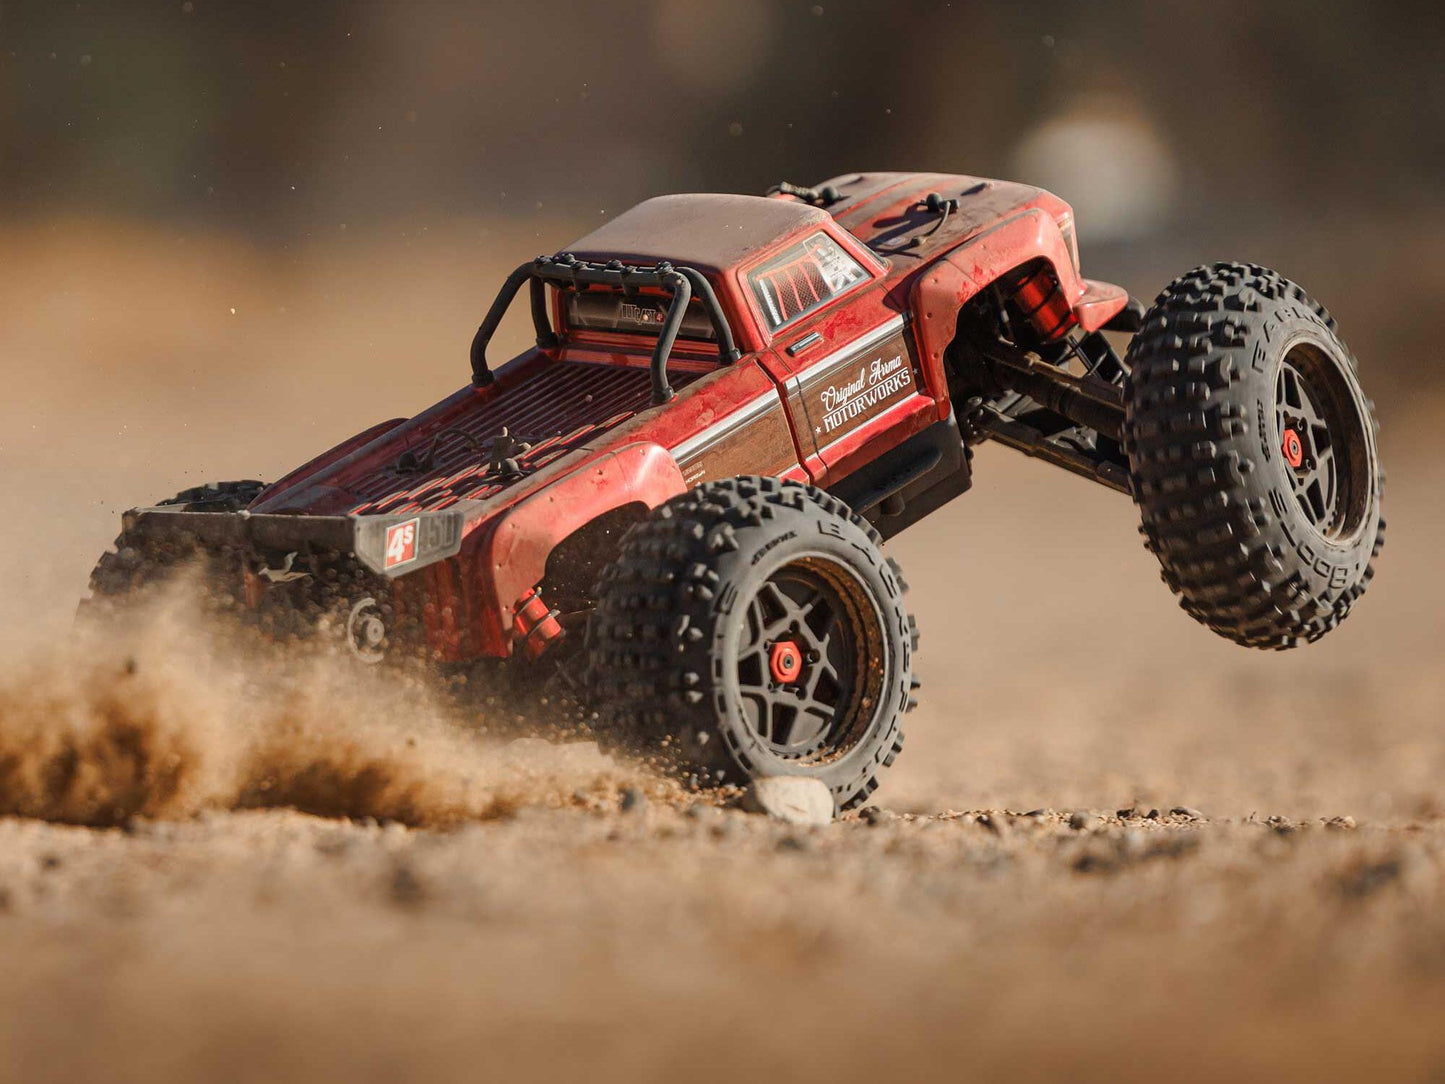 ARRMA 1/10 Outcast 4x4 4S BLX Centre Diff Stunt MT (RED)  ARA4410V2T4  (supplier stock - available to order)